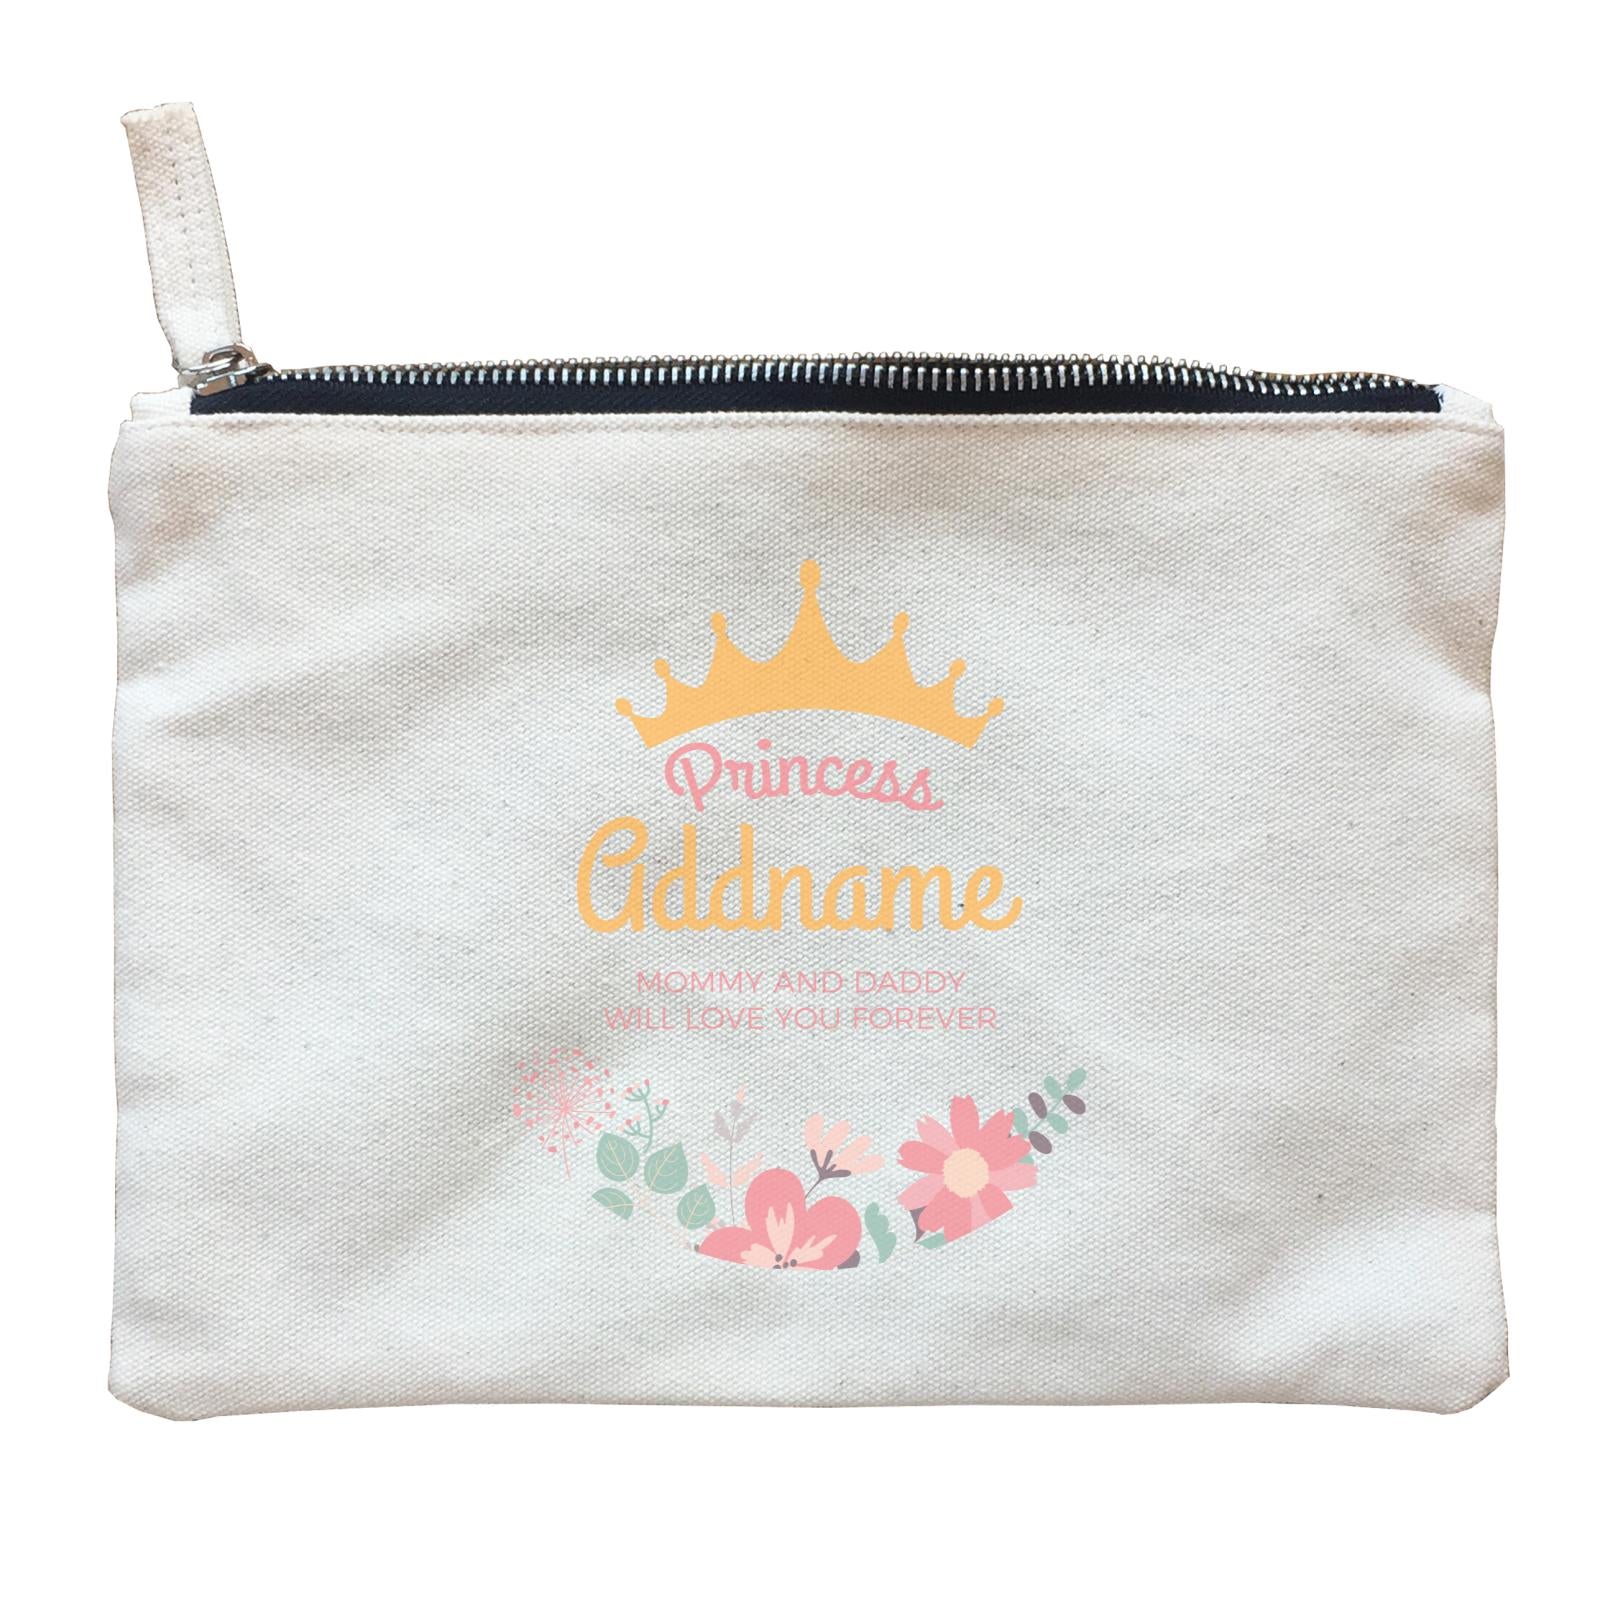 Princess with Tiara and Flowers 2 Personalizable with Name and Text Zipper Pouch